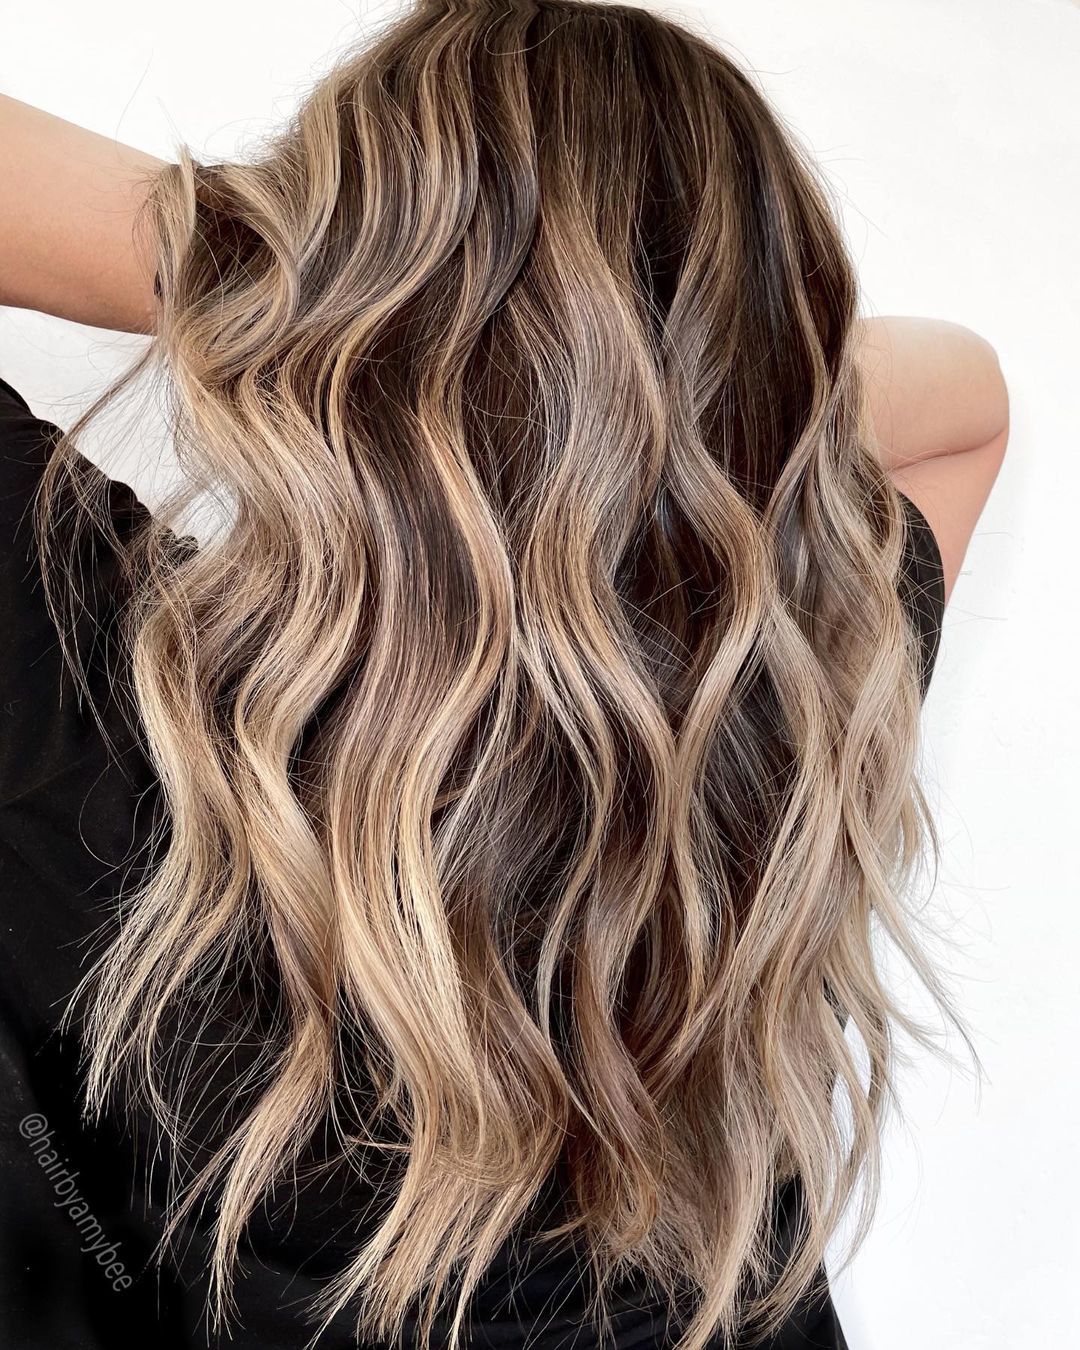 50 Awesome Long Layered Hair Ideas For 2021 images 40